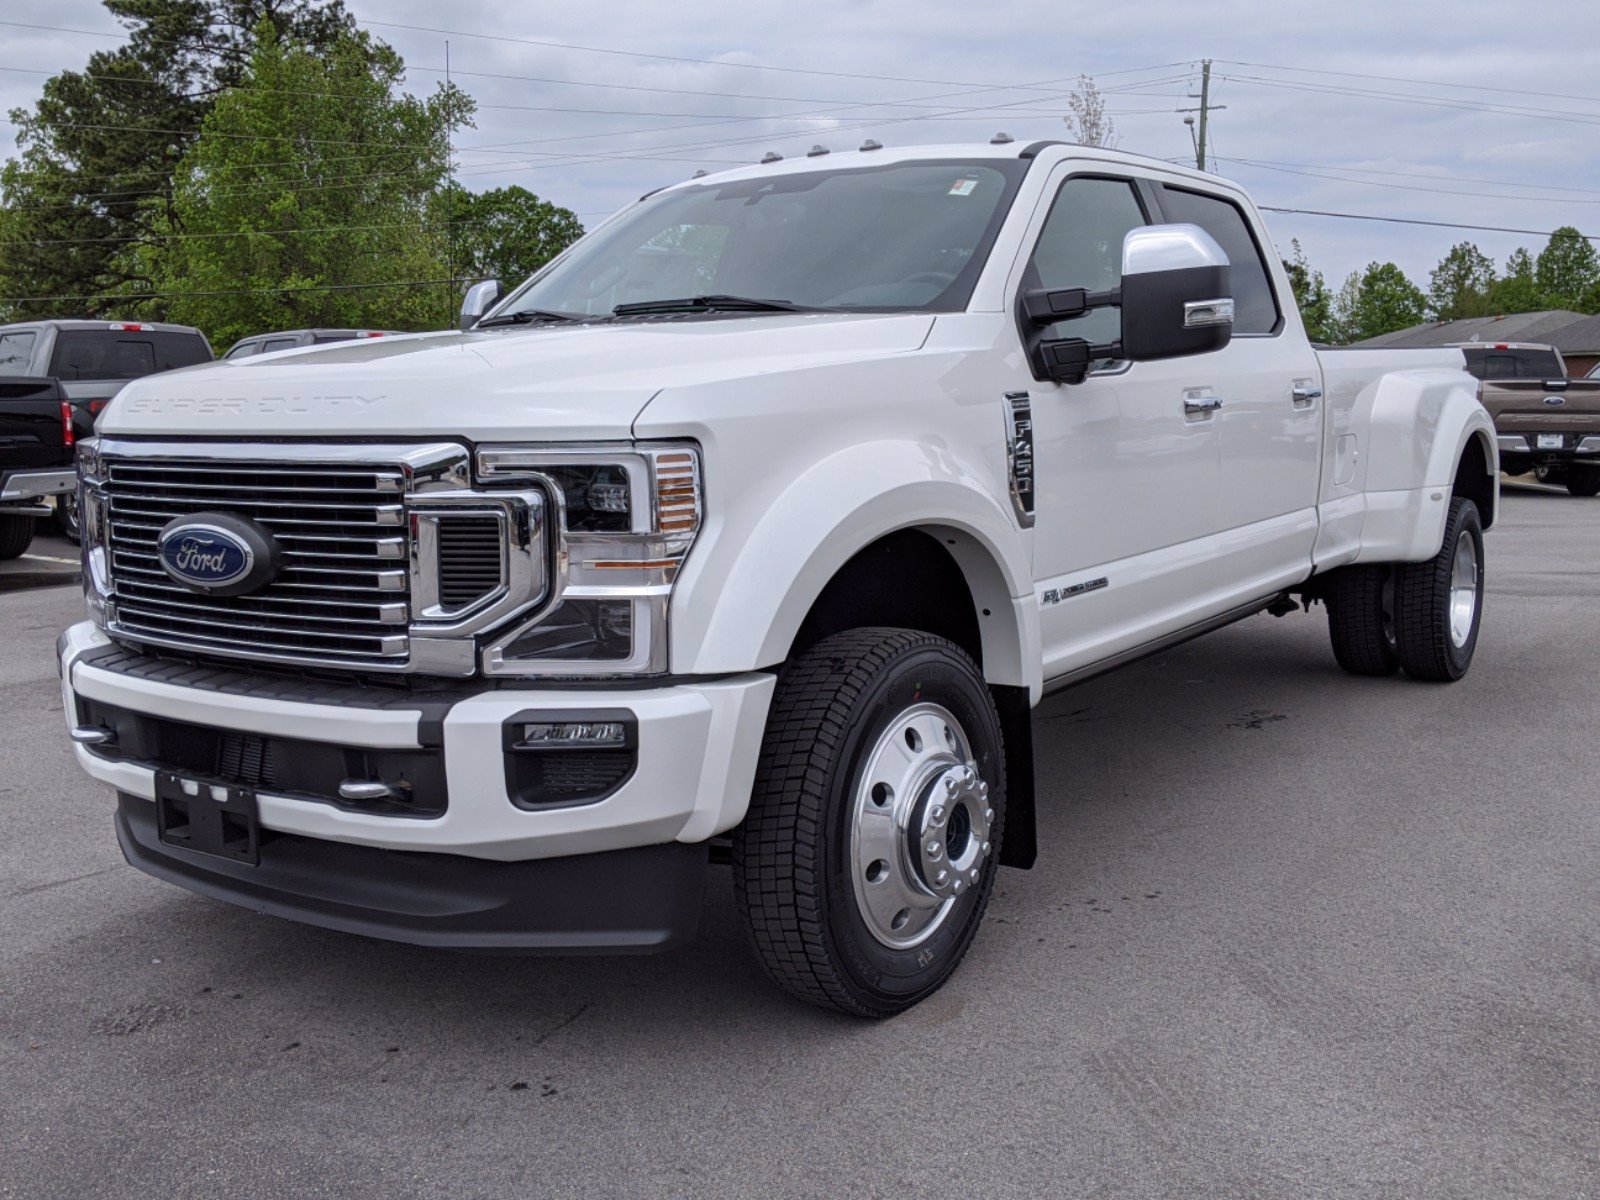 New 2020 Ford Super Duty F-450 DRW Platinum With Navigation & 4WD